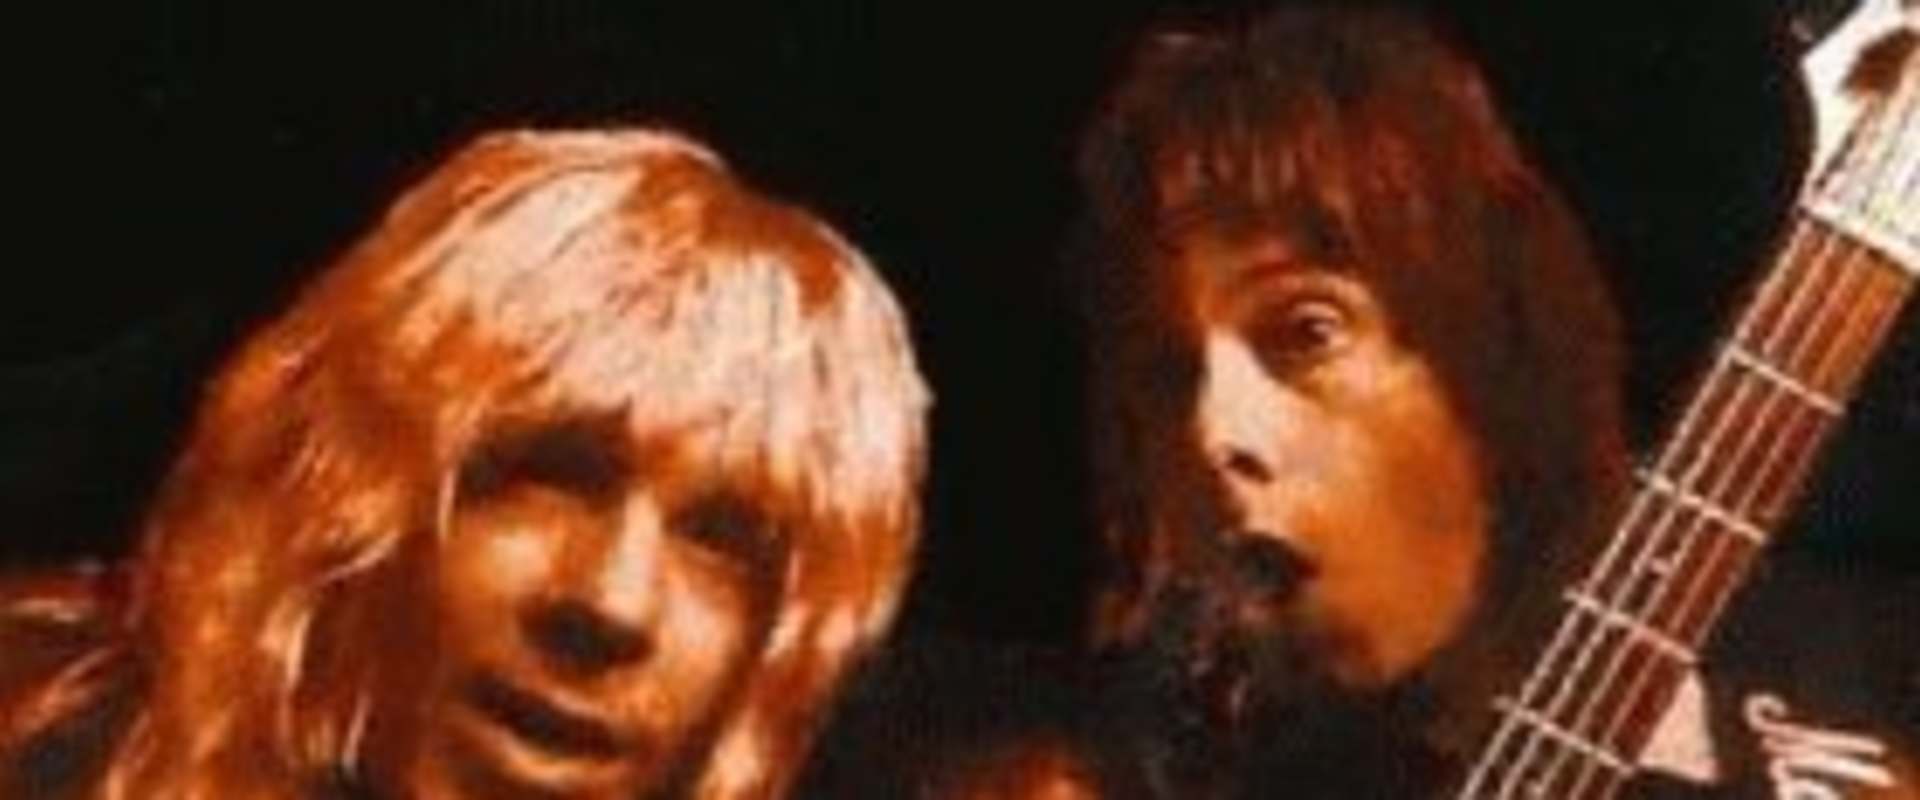 A Spinal Tap Reunion: The 25th Anniversary London Sell-Out background 2